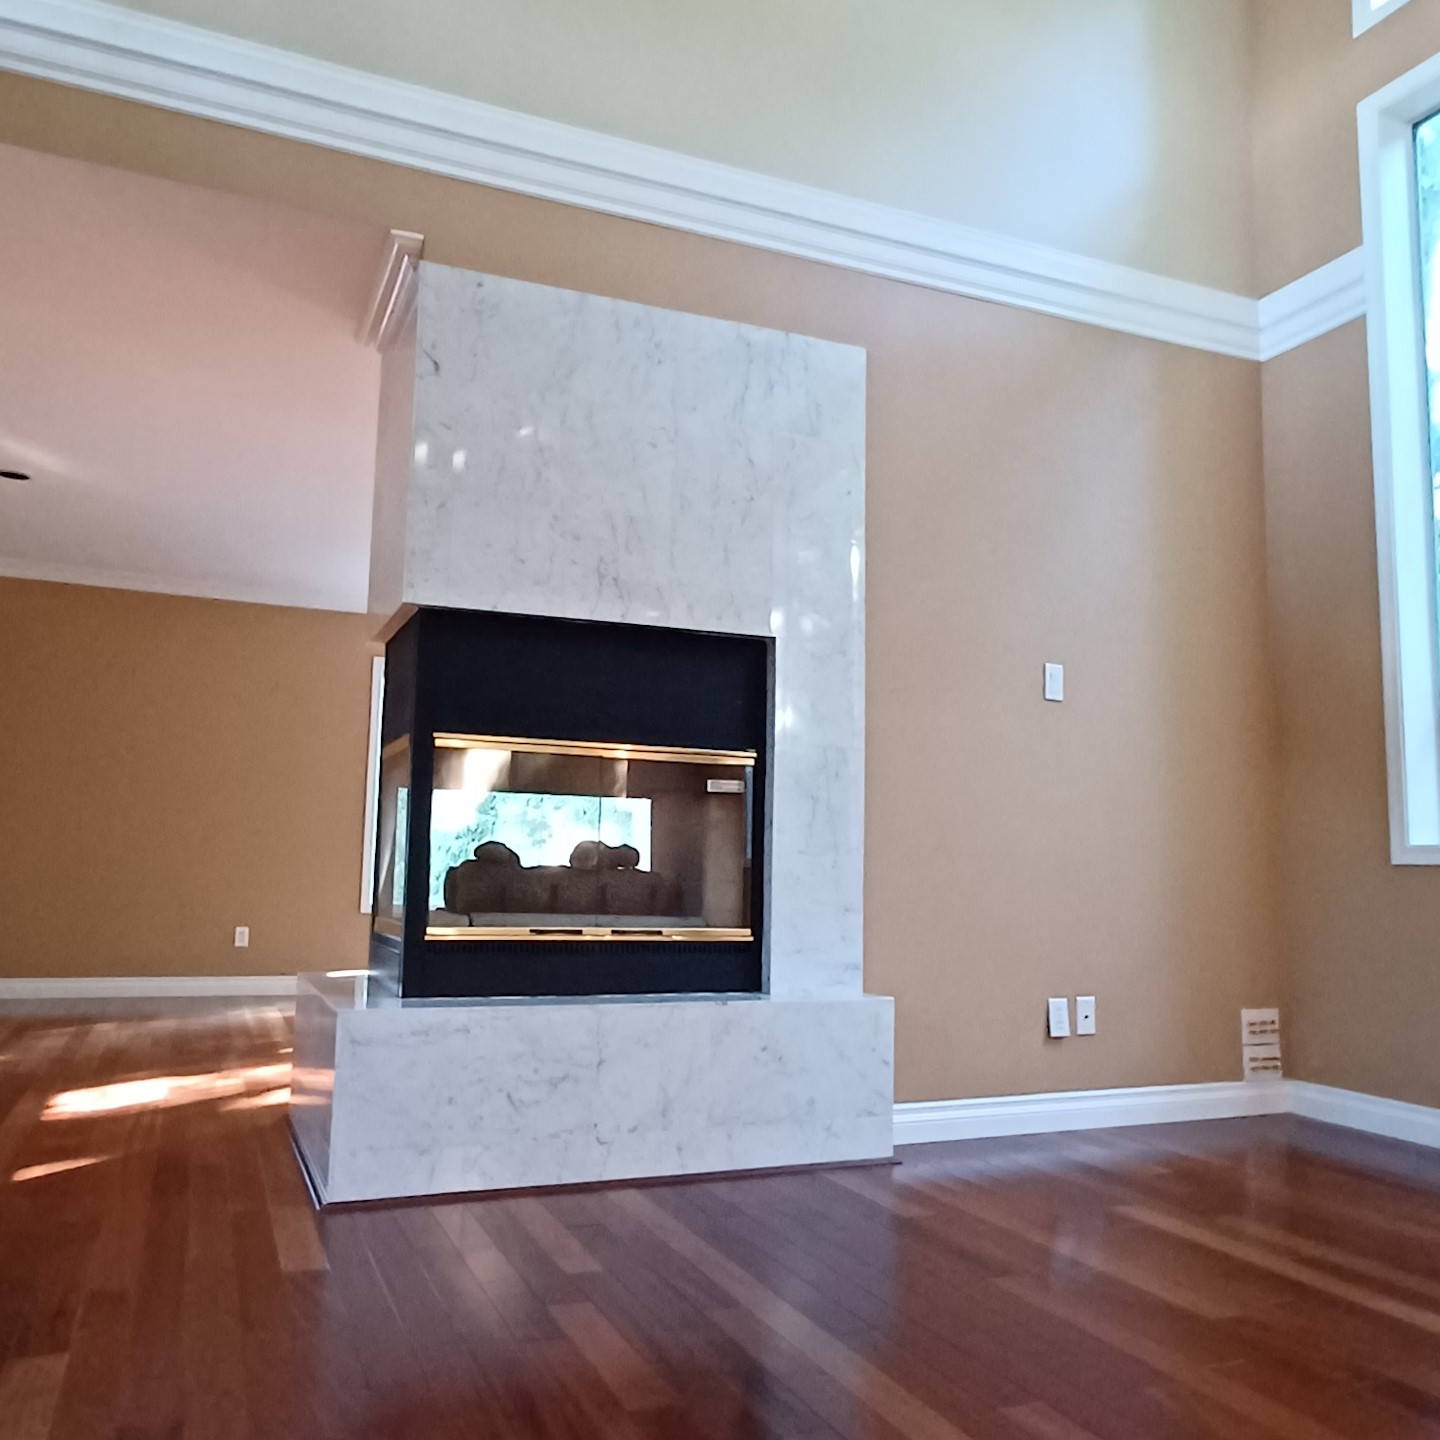 A modern fireplace at the centre of a living room.